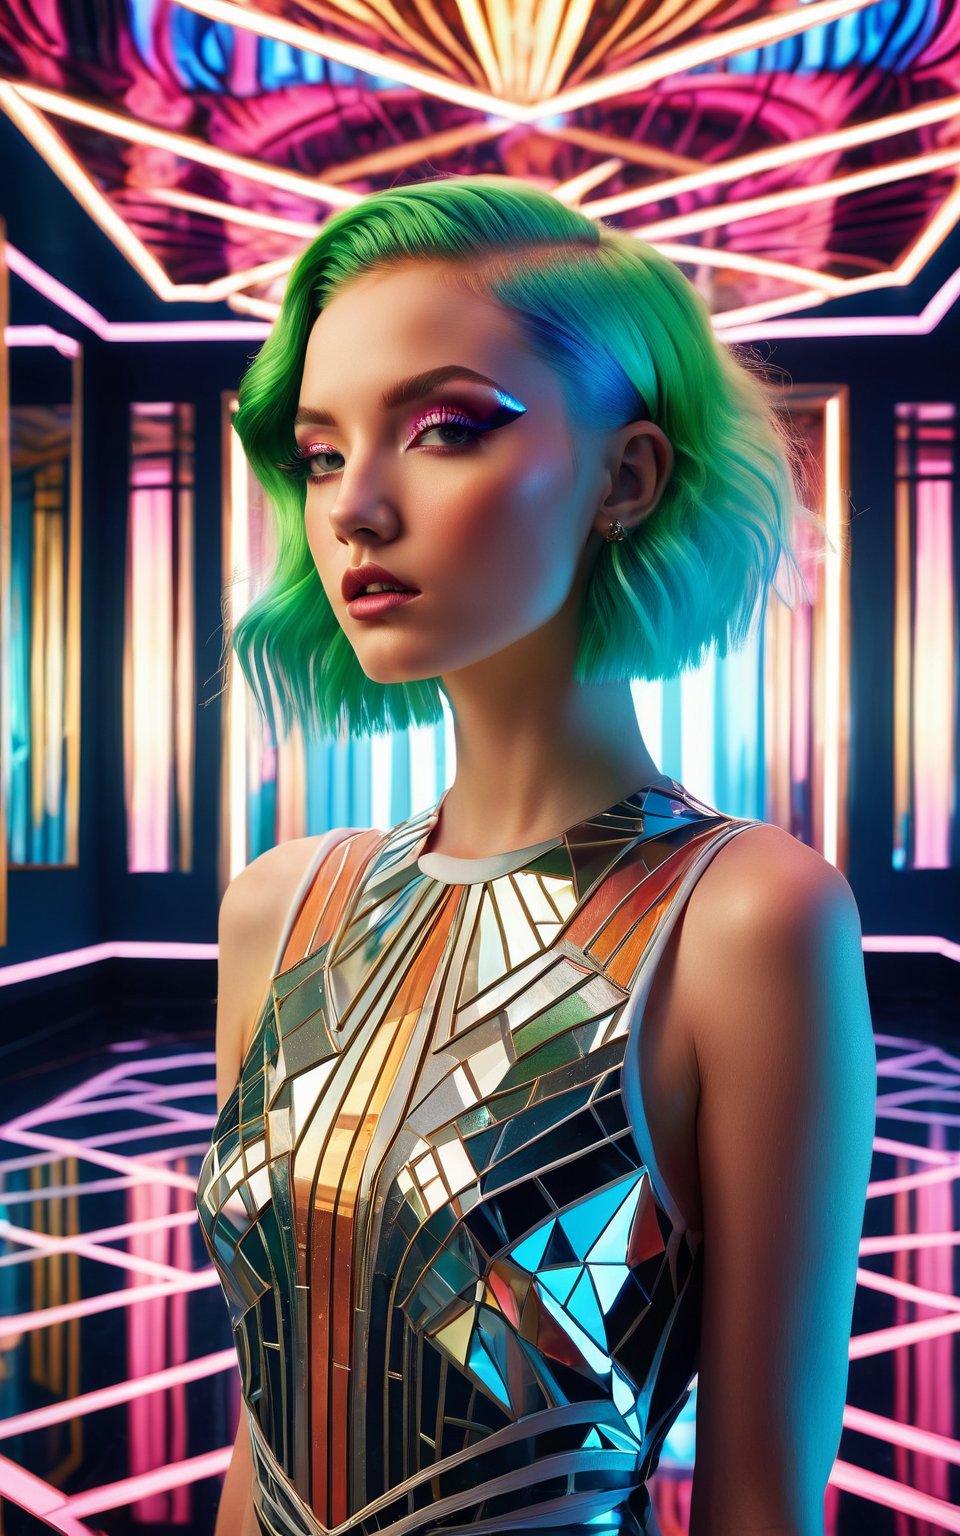 (best quality, 4K, 8K, high-resolution, masterpiece), ultra-detailed, photorealistic, young woman, vibrant neon hair, geometric Art Deco patterns on face, surreal dream-like setting, mirror-like floors, mirror-like walls, reflections, posing, intricate facial designs, modern fashion, ethereal lighting, digital art